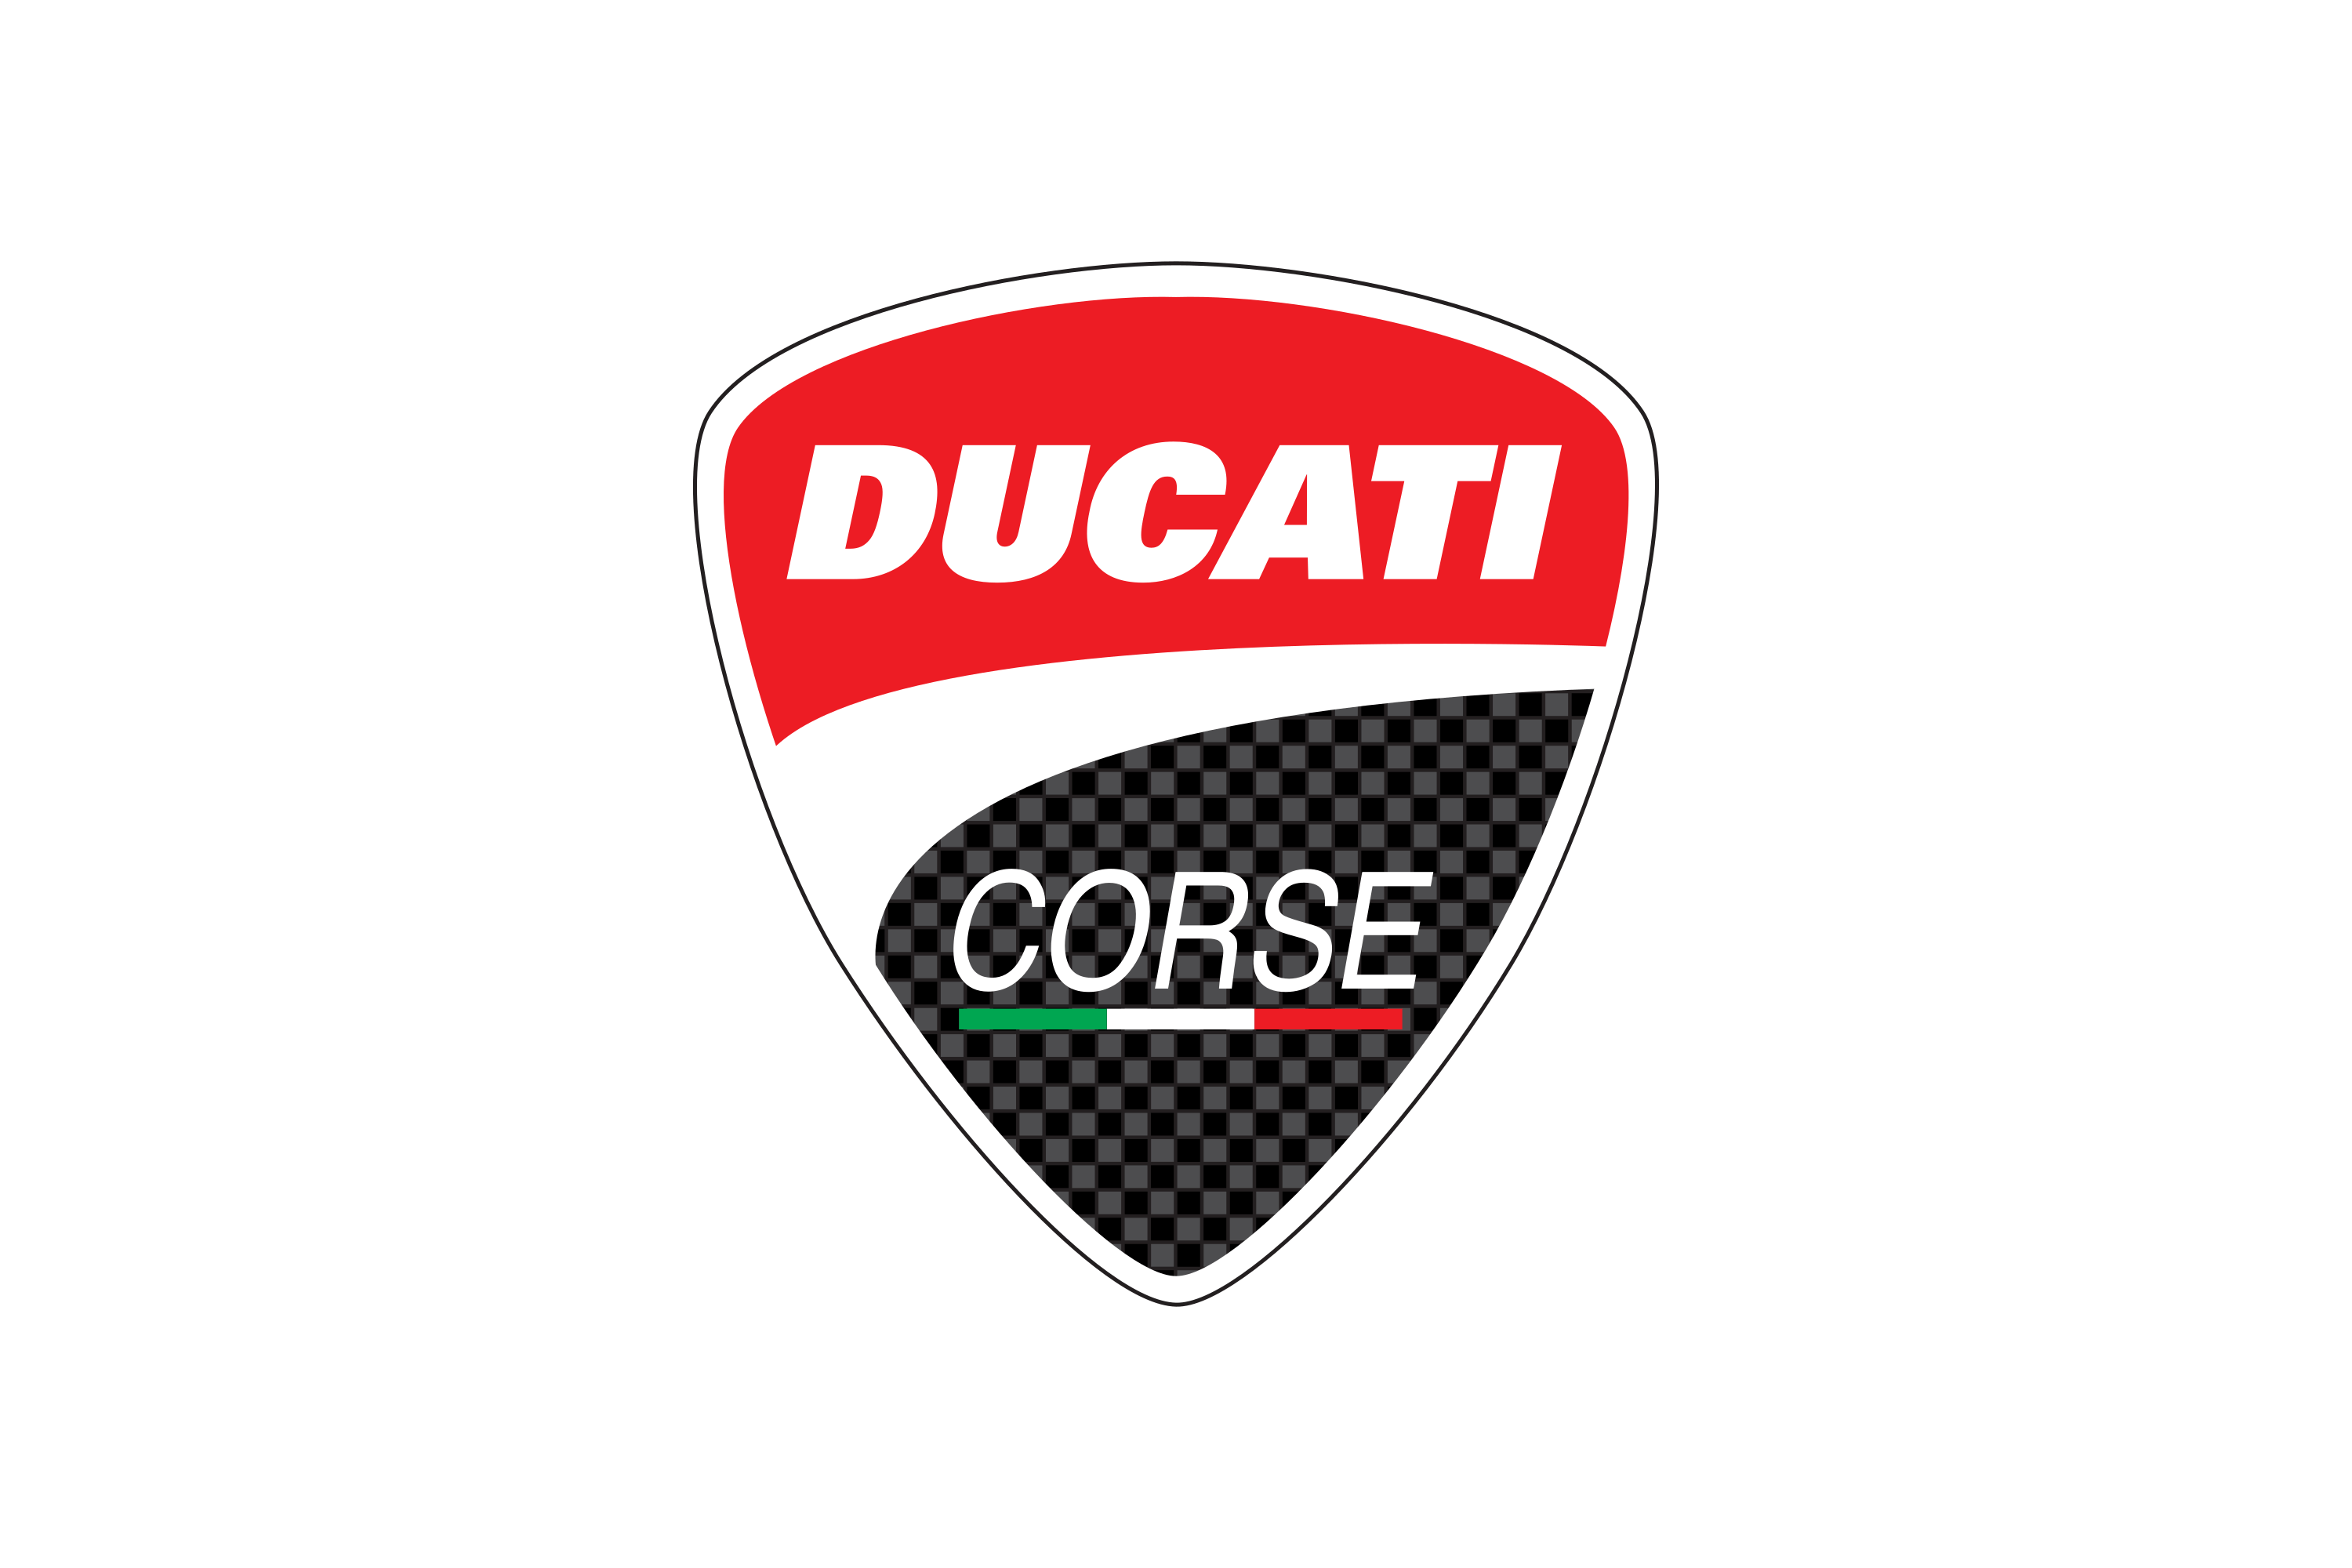 Download Ducati Corse Logo In Svg Vector Or Png File Format   Logo Pluspng.com  - Ducati, Transparent background PNG HD thumbnail